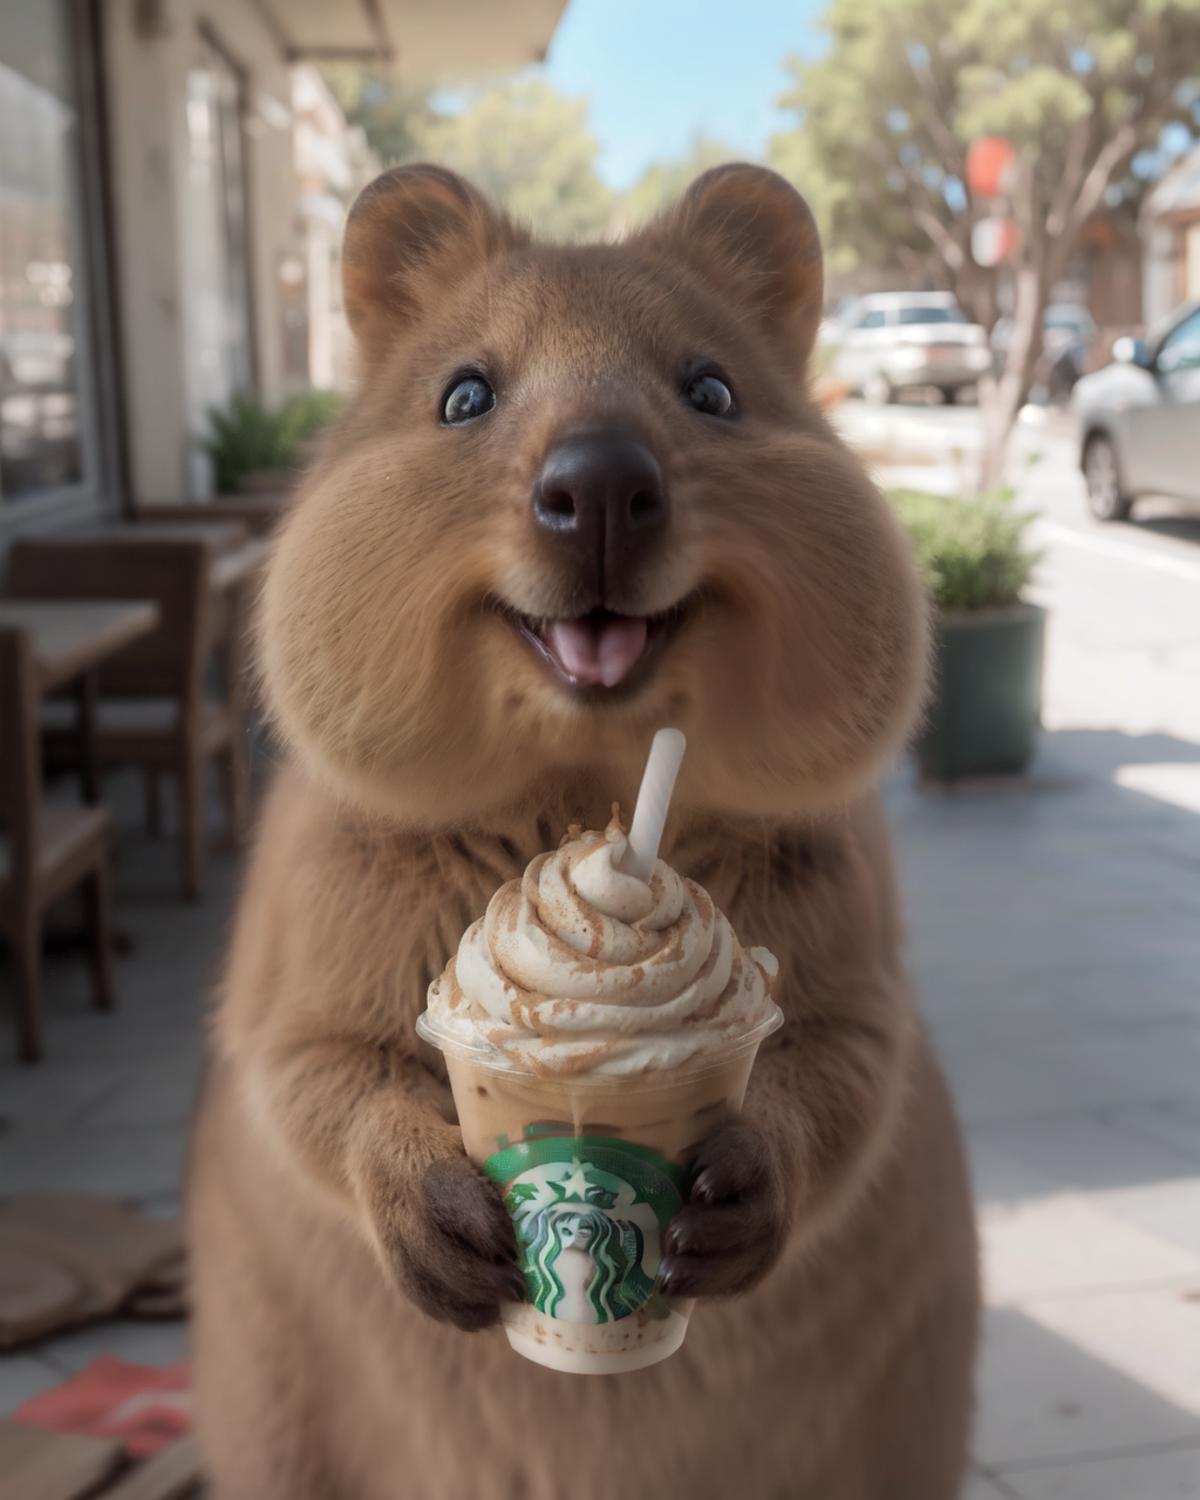 A Starbucks drink in the hands of a chubby rodent.